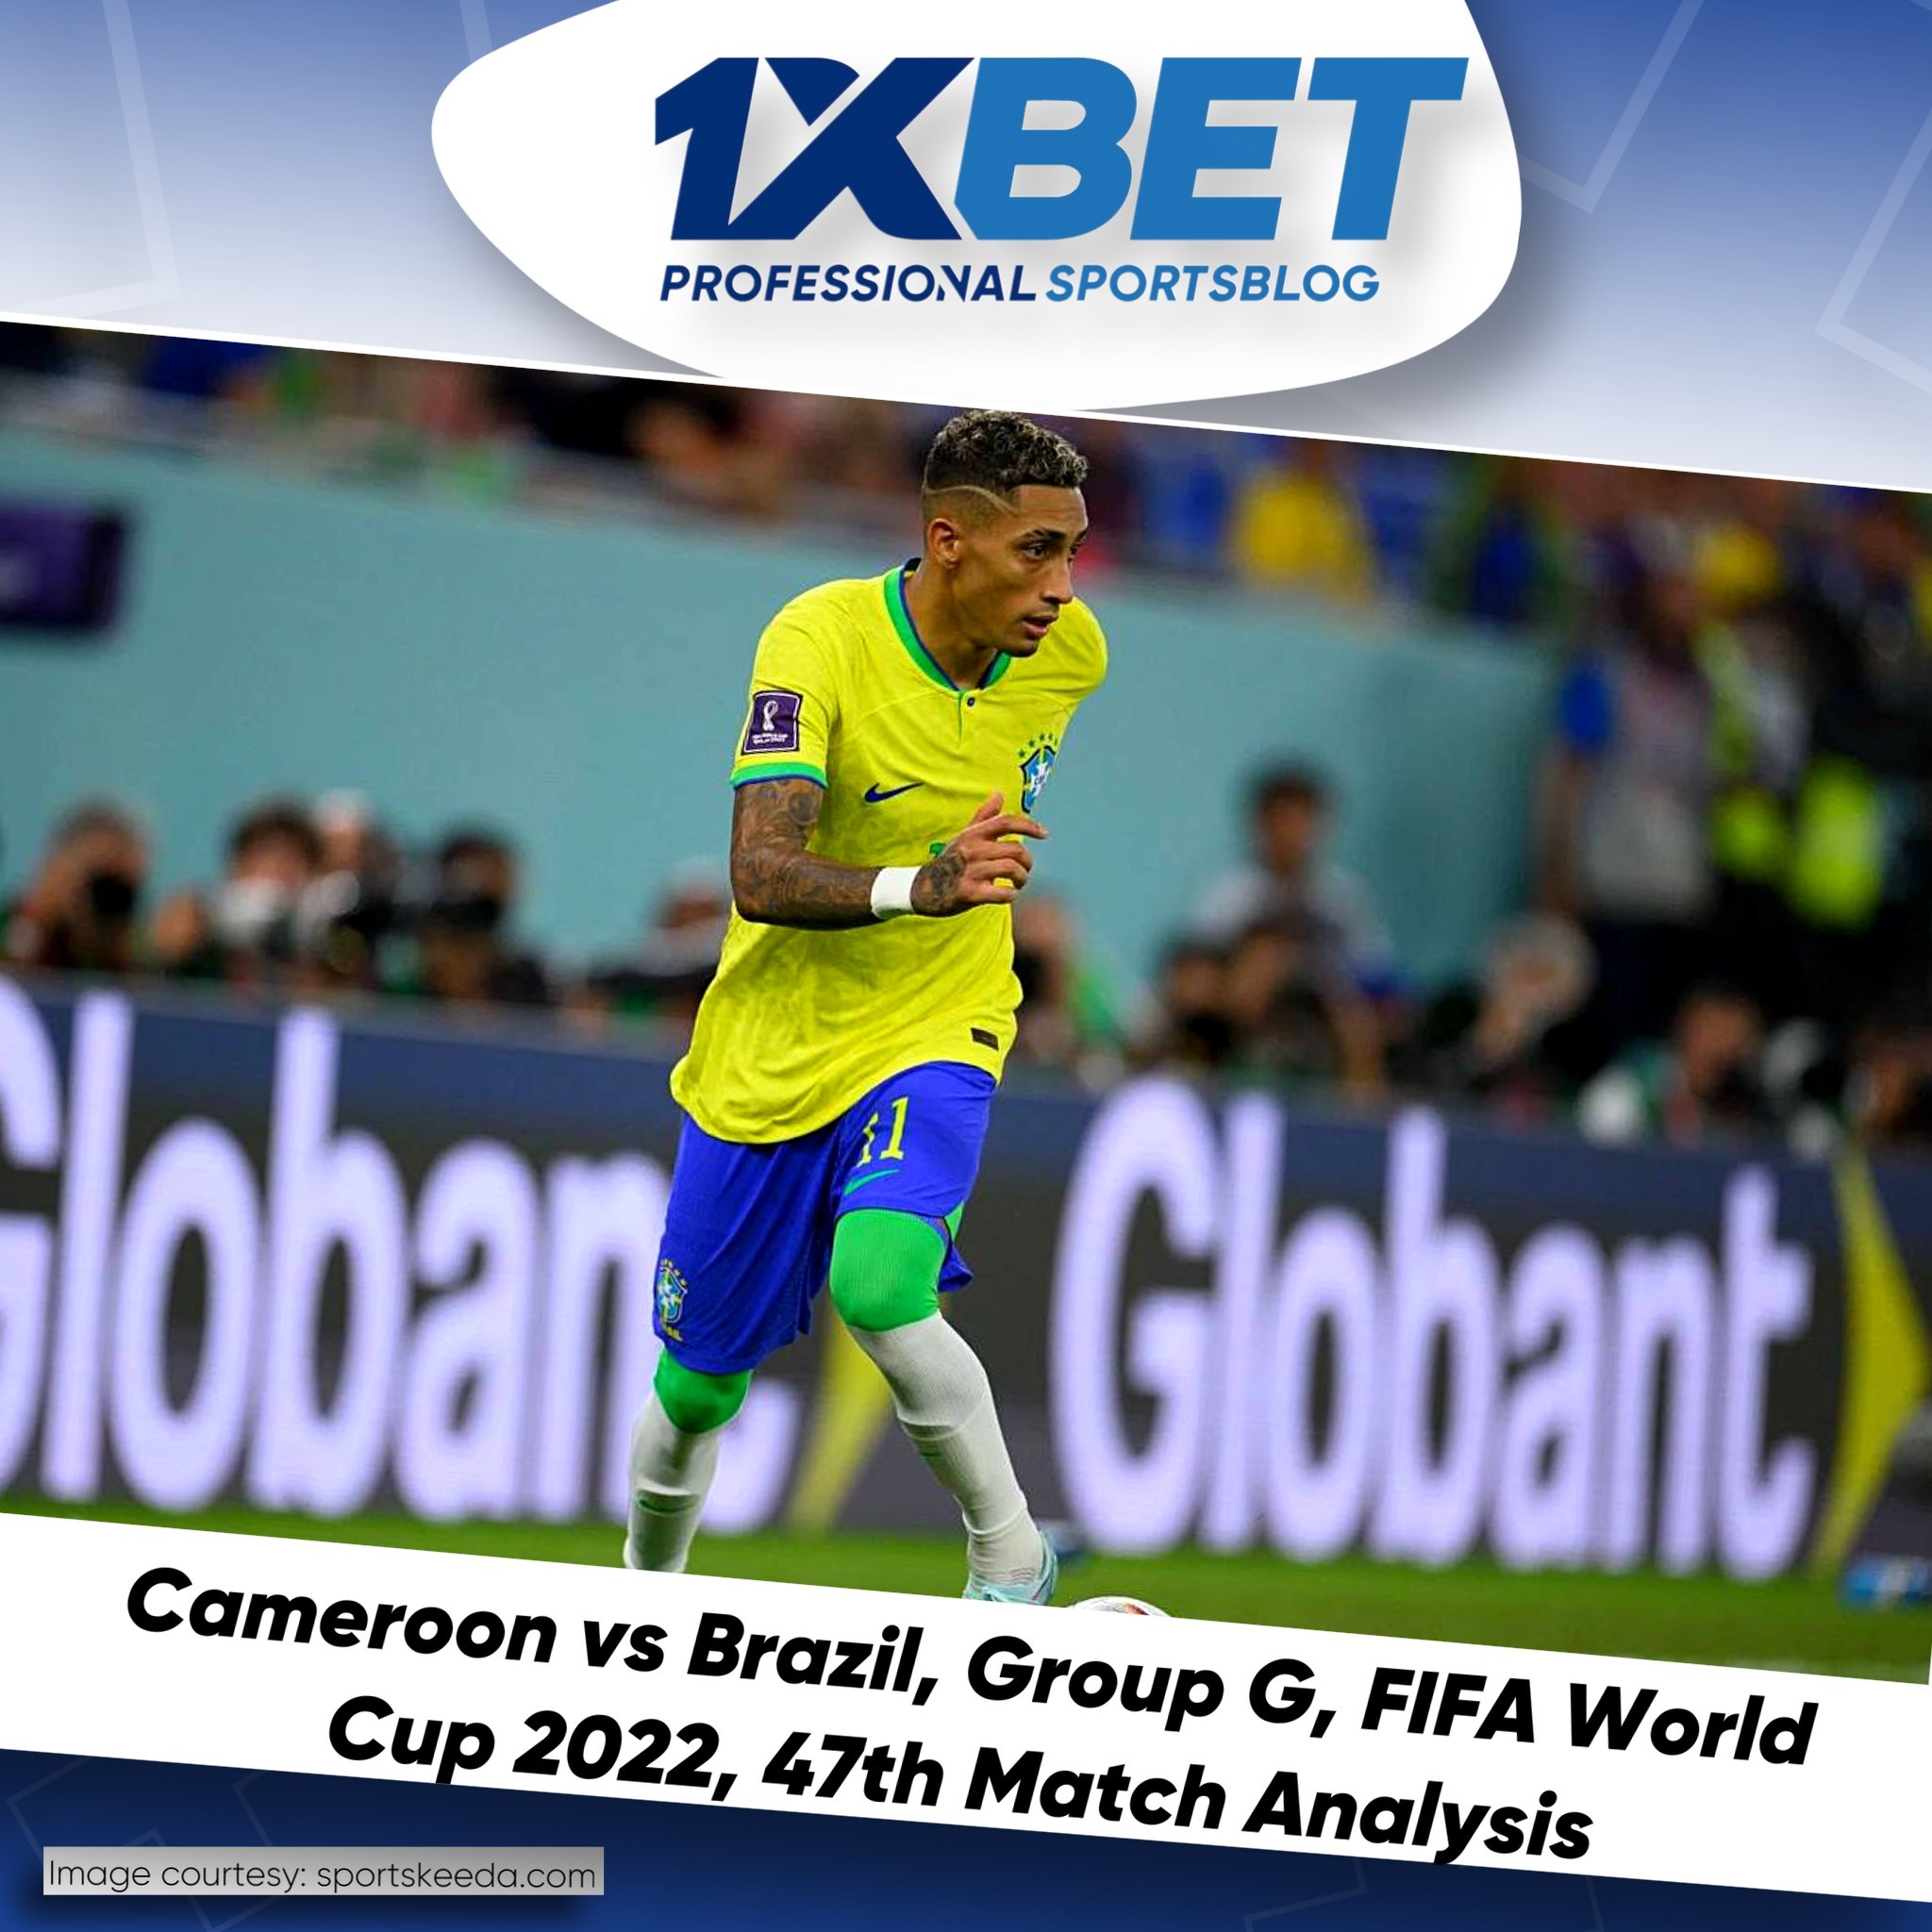 Cameroon vs Brazil, Group G, FIFA World Cup 2022, 47th Match Analysis